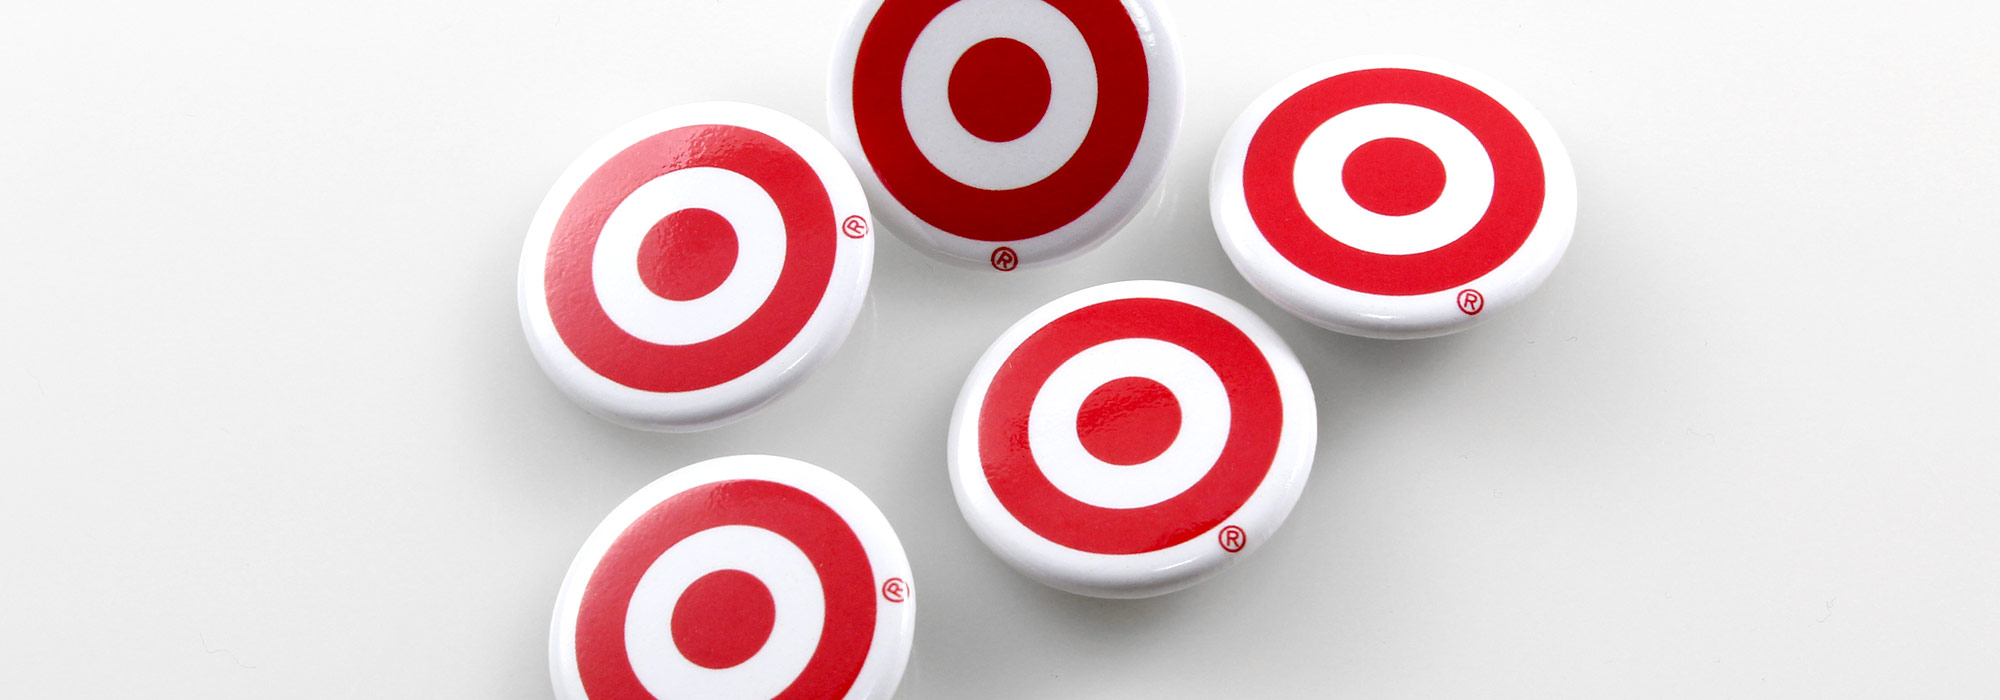 Round Custom Buttons Target